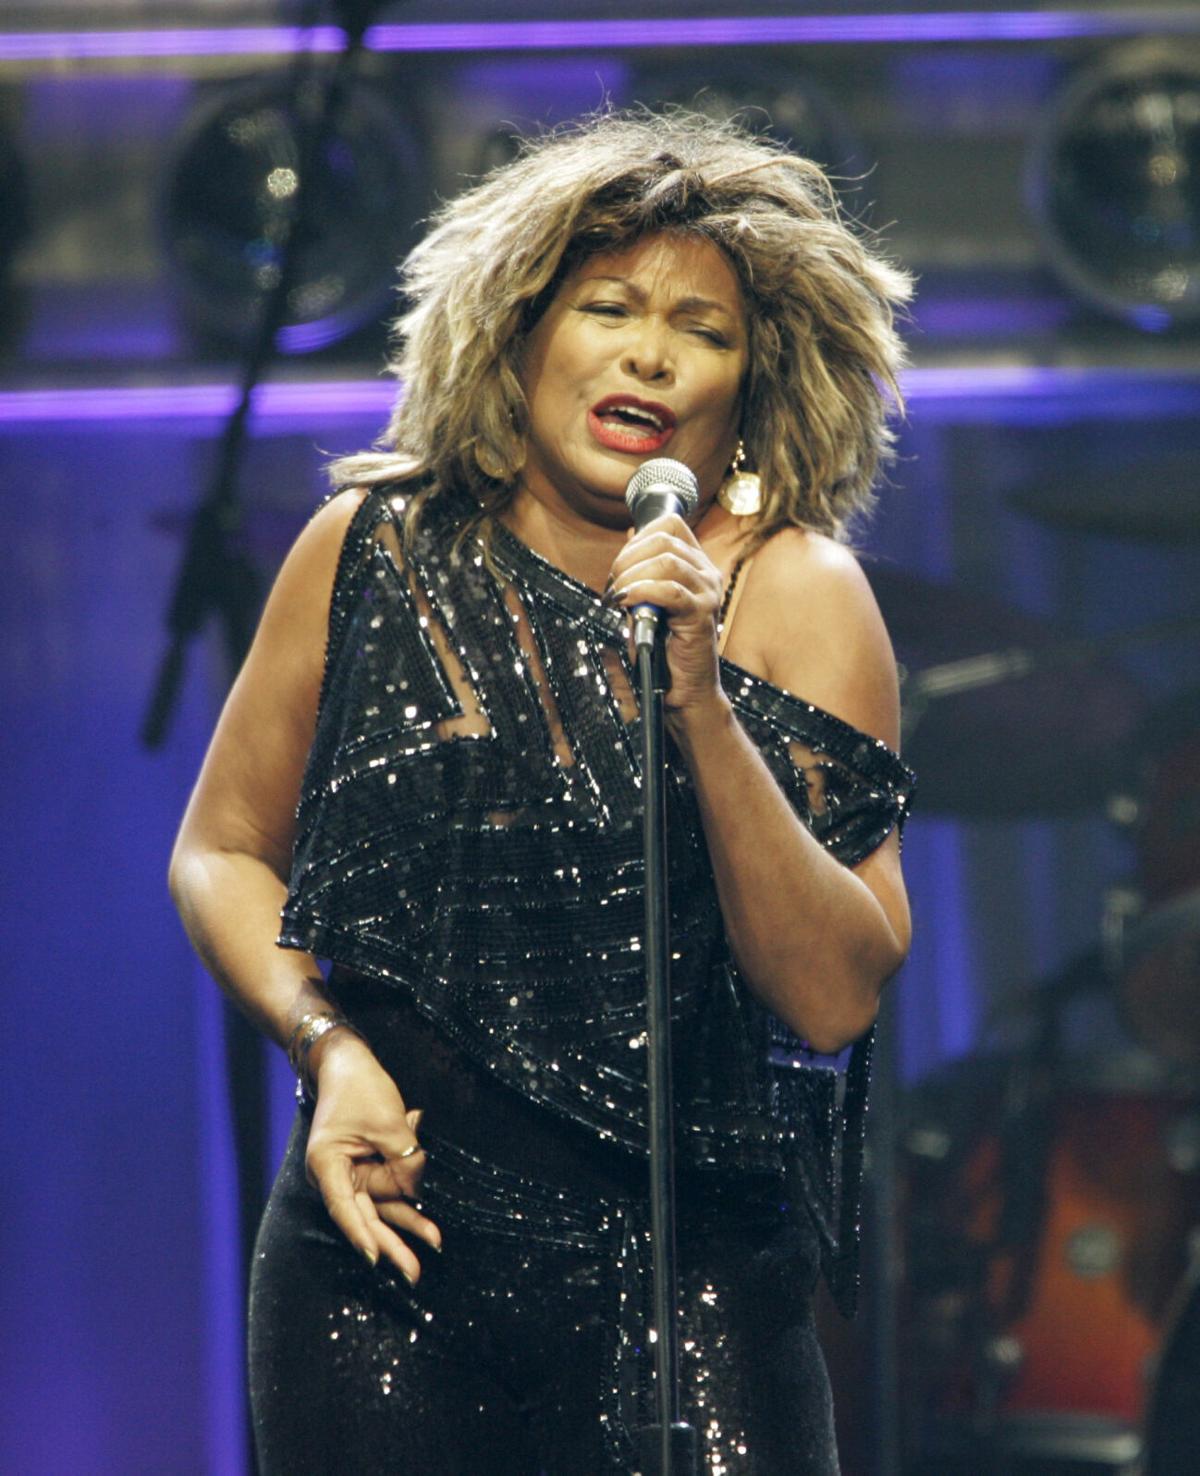 Tina Turner, unstoppable superstar whose hits included 'What's Love Got to  Do With It,' dead at 83